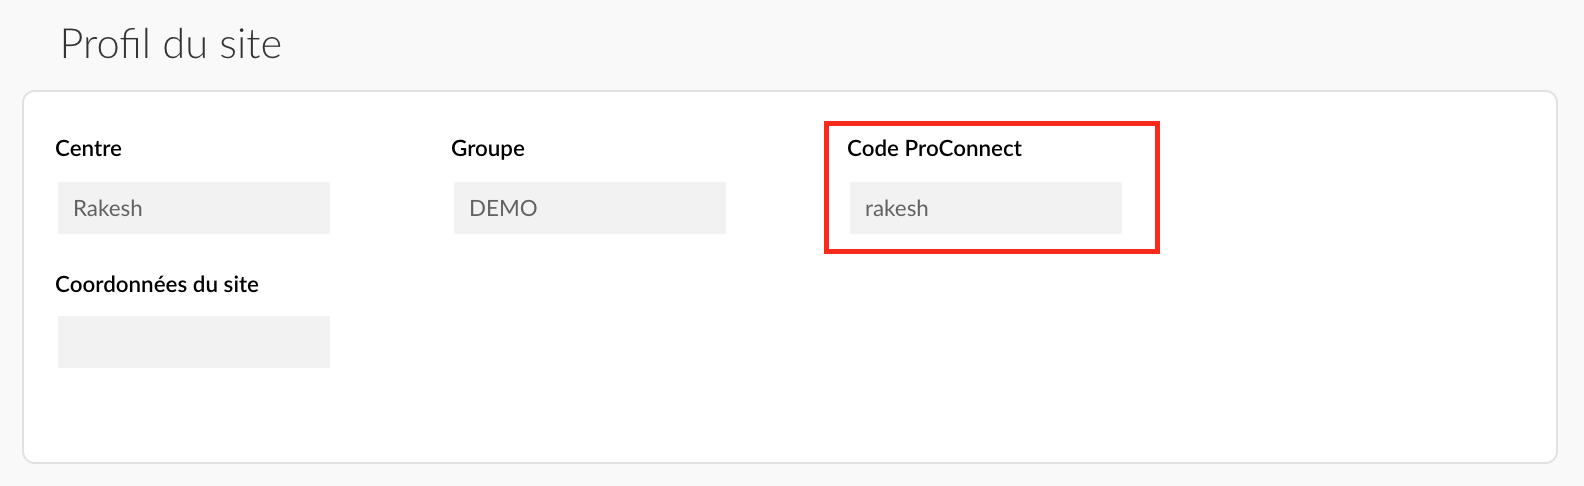 french-web-siteprofileproconnect.png